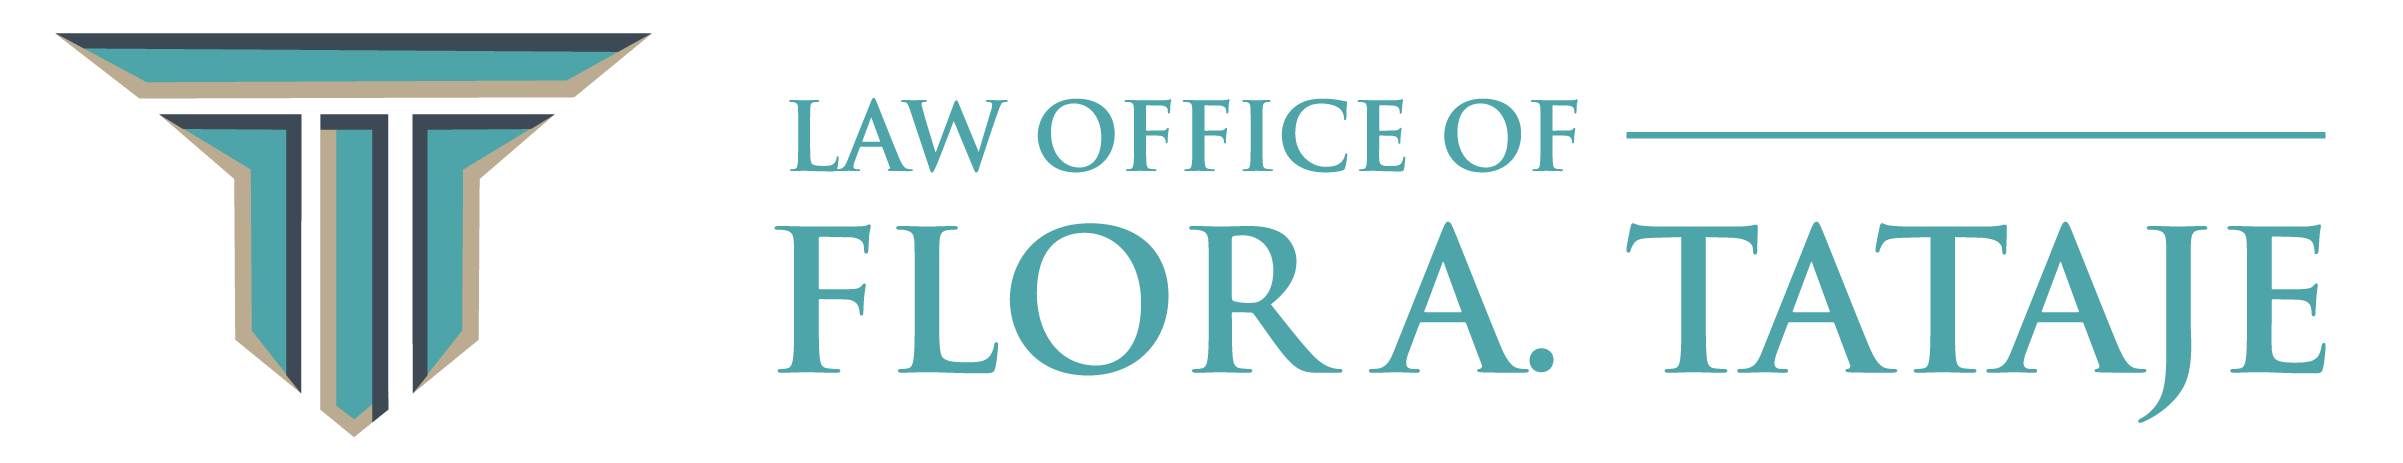 Law Office of Flor A. Tataje logo - footer